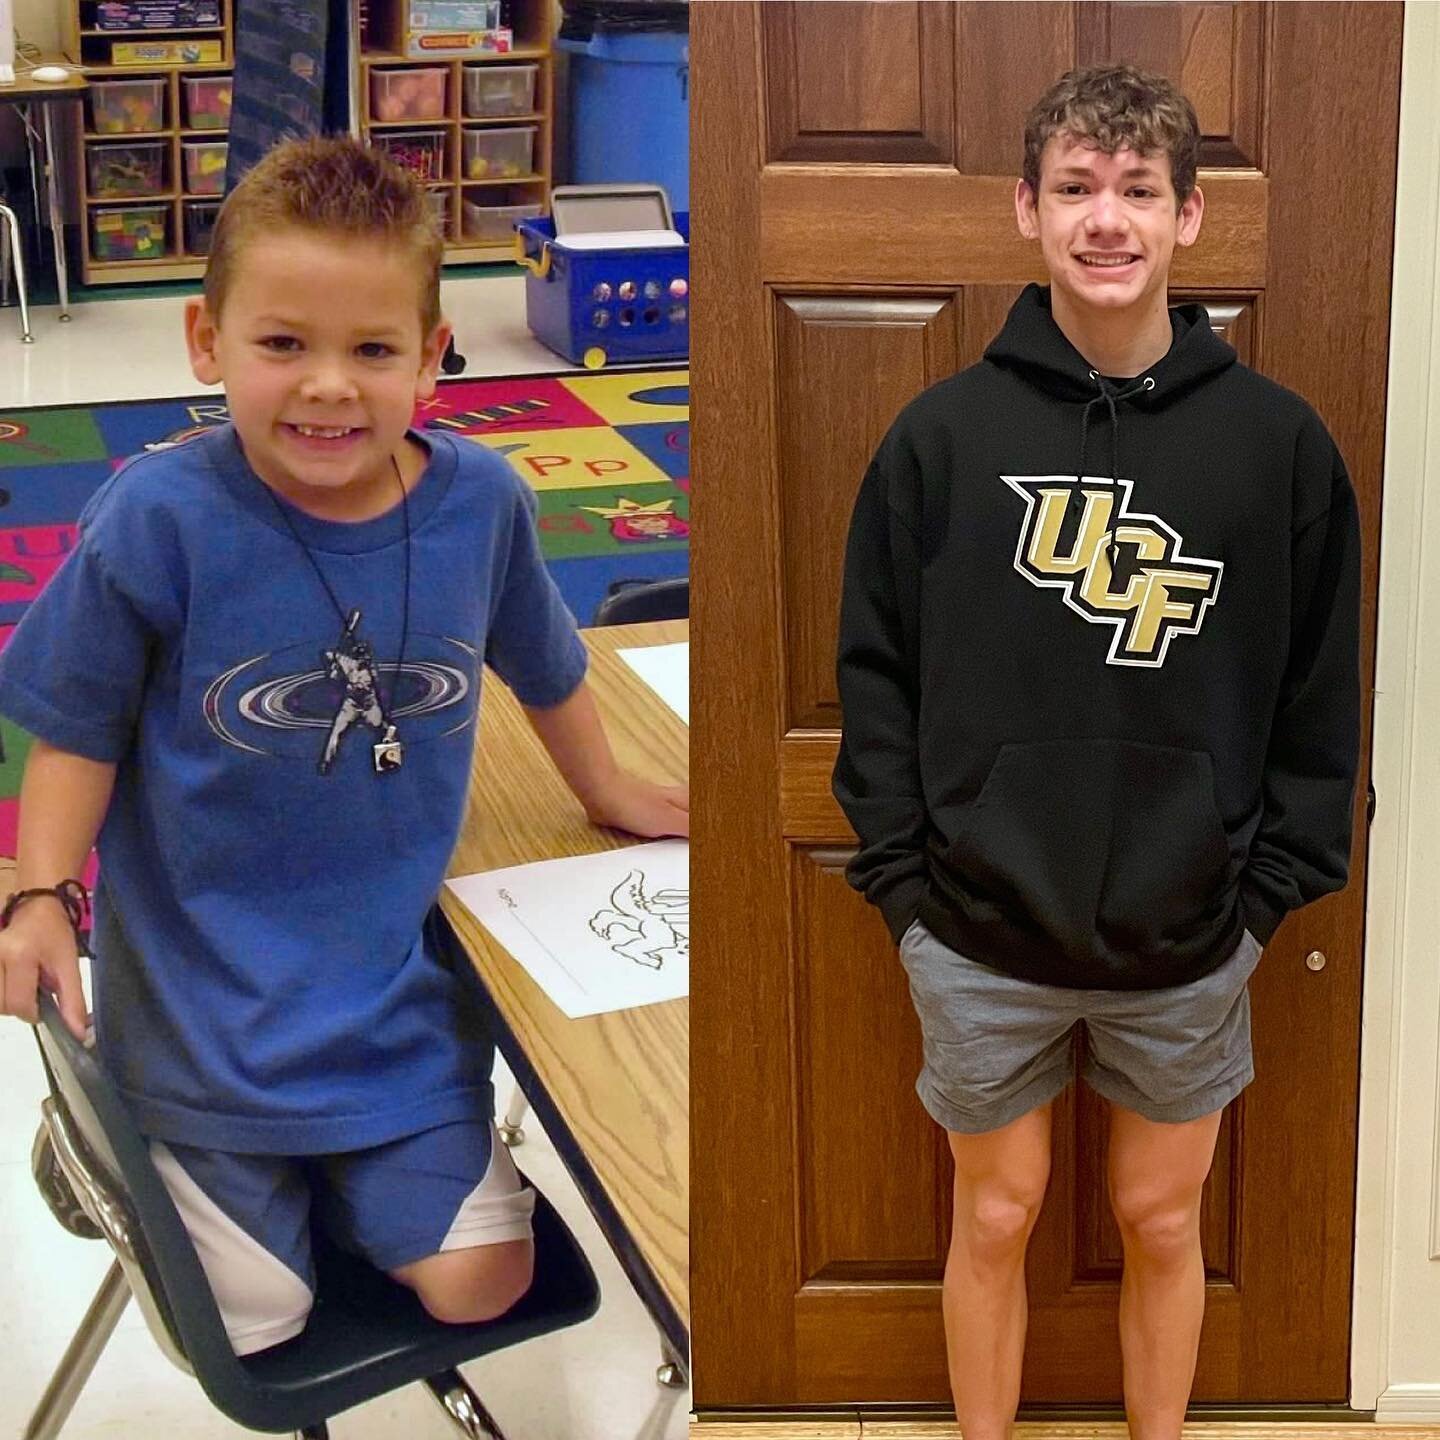 It&rsquo;s so surreal that my baby is now graduating! Here is his first day of school and last day of school - there was never a day he didn&rsquo;t take full advantage of! ❤️ So proud of the man he has become!